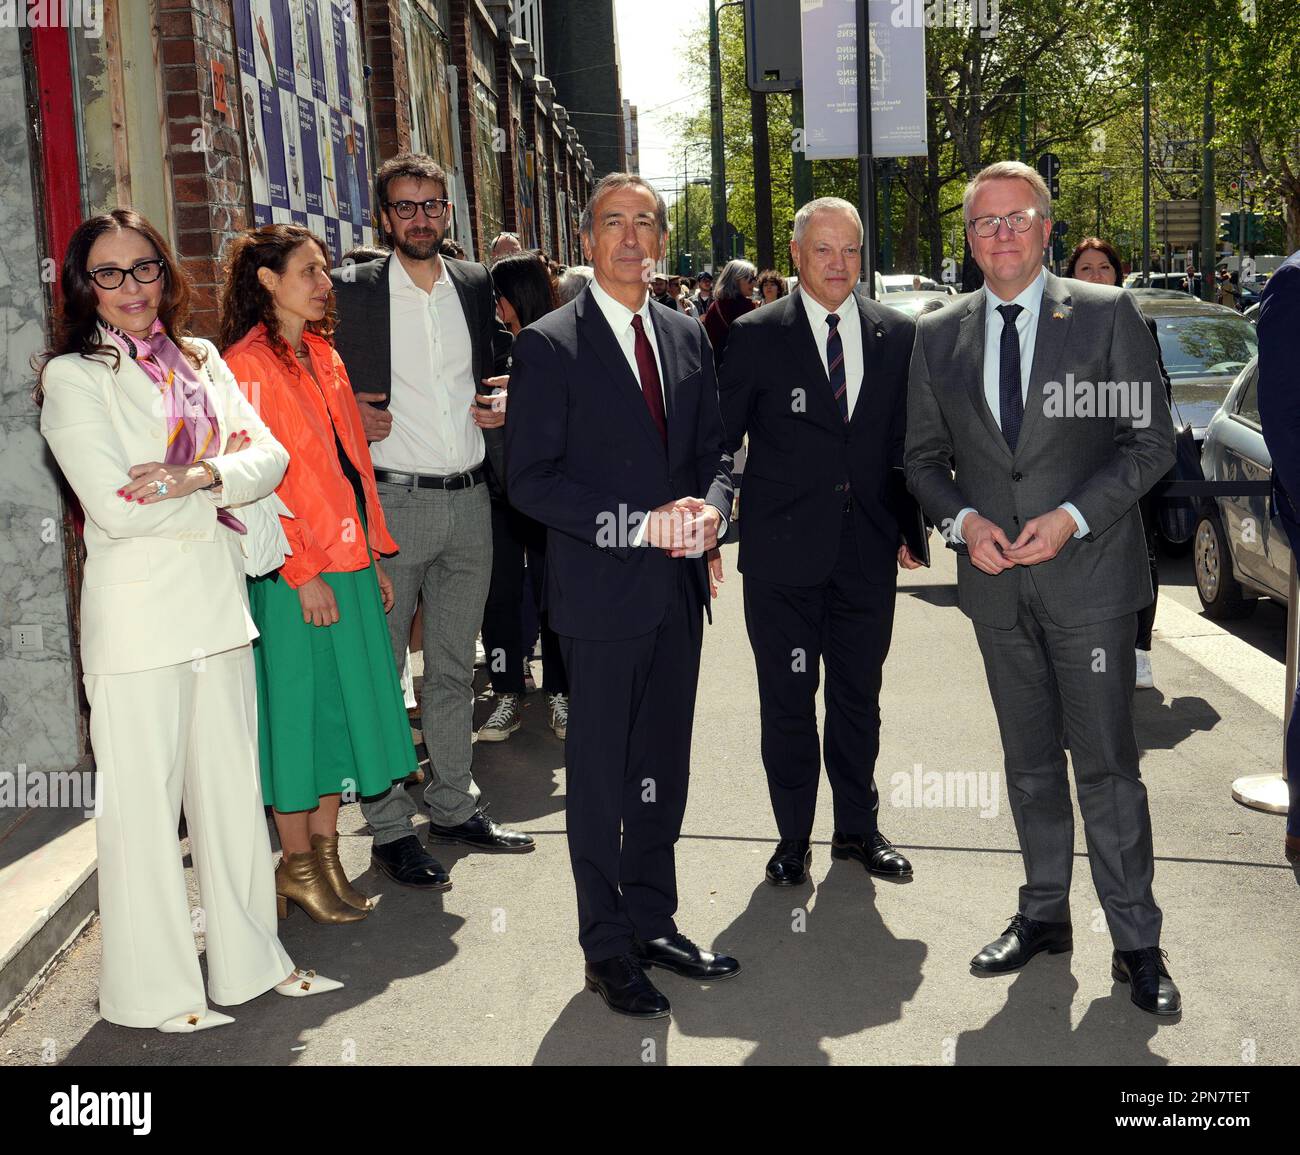 Milan,Visit of the Danish Princess Mary Donaldson to the Denmark stand for the Milan Design Week, Fuori Salone, Salone del Mobile at the Ex Macello in Via Molise, in the photo Giuseppe Sala, the Minister of Industry Morten Bodskov, the Deputy Minister Valerio Valentini, Joseph Grima and Valentina Ciuffi Editorial Usage Only Stock Photo